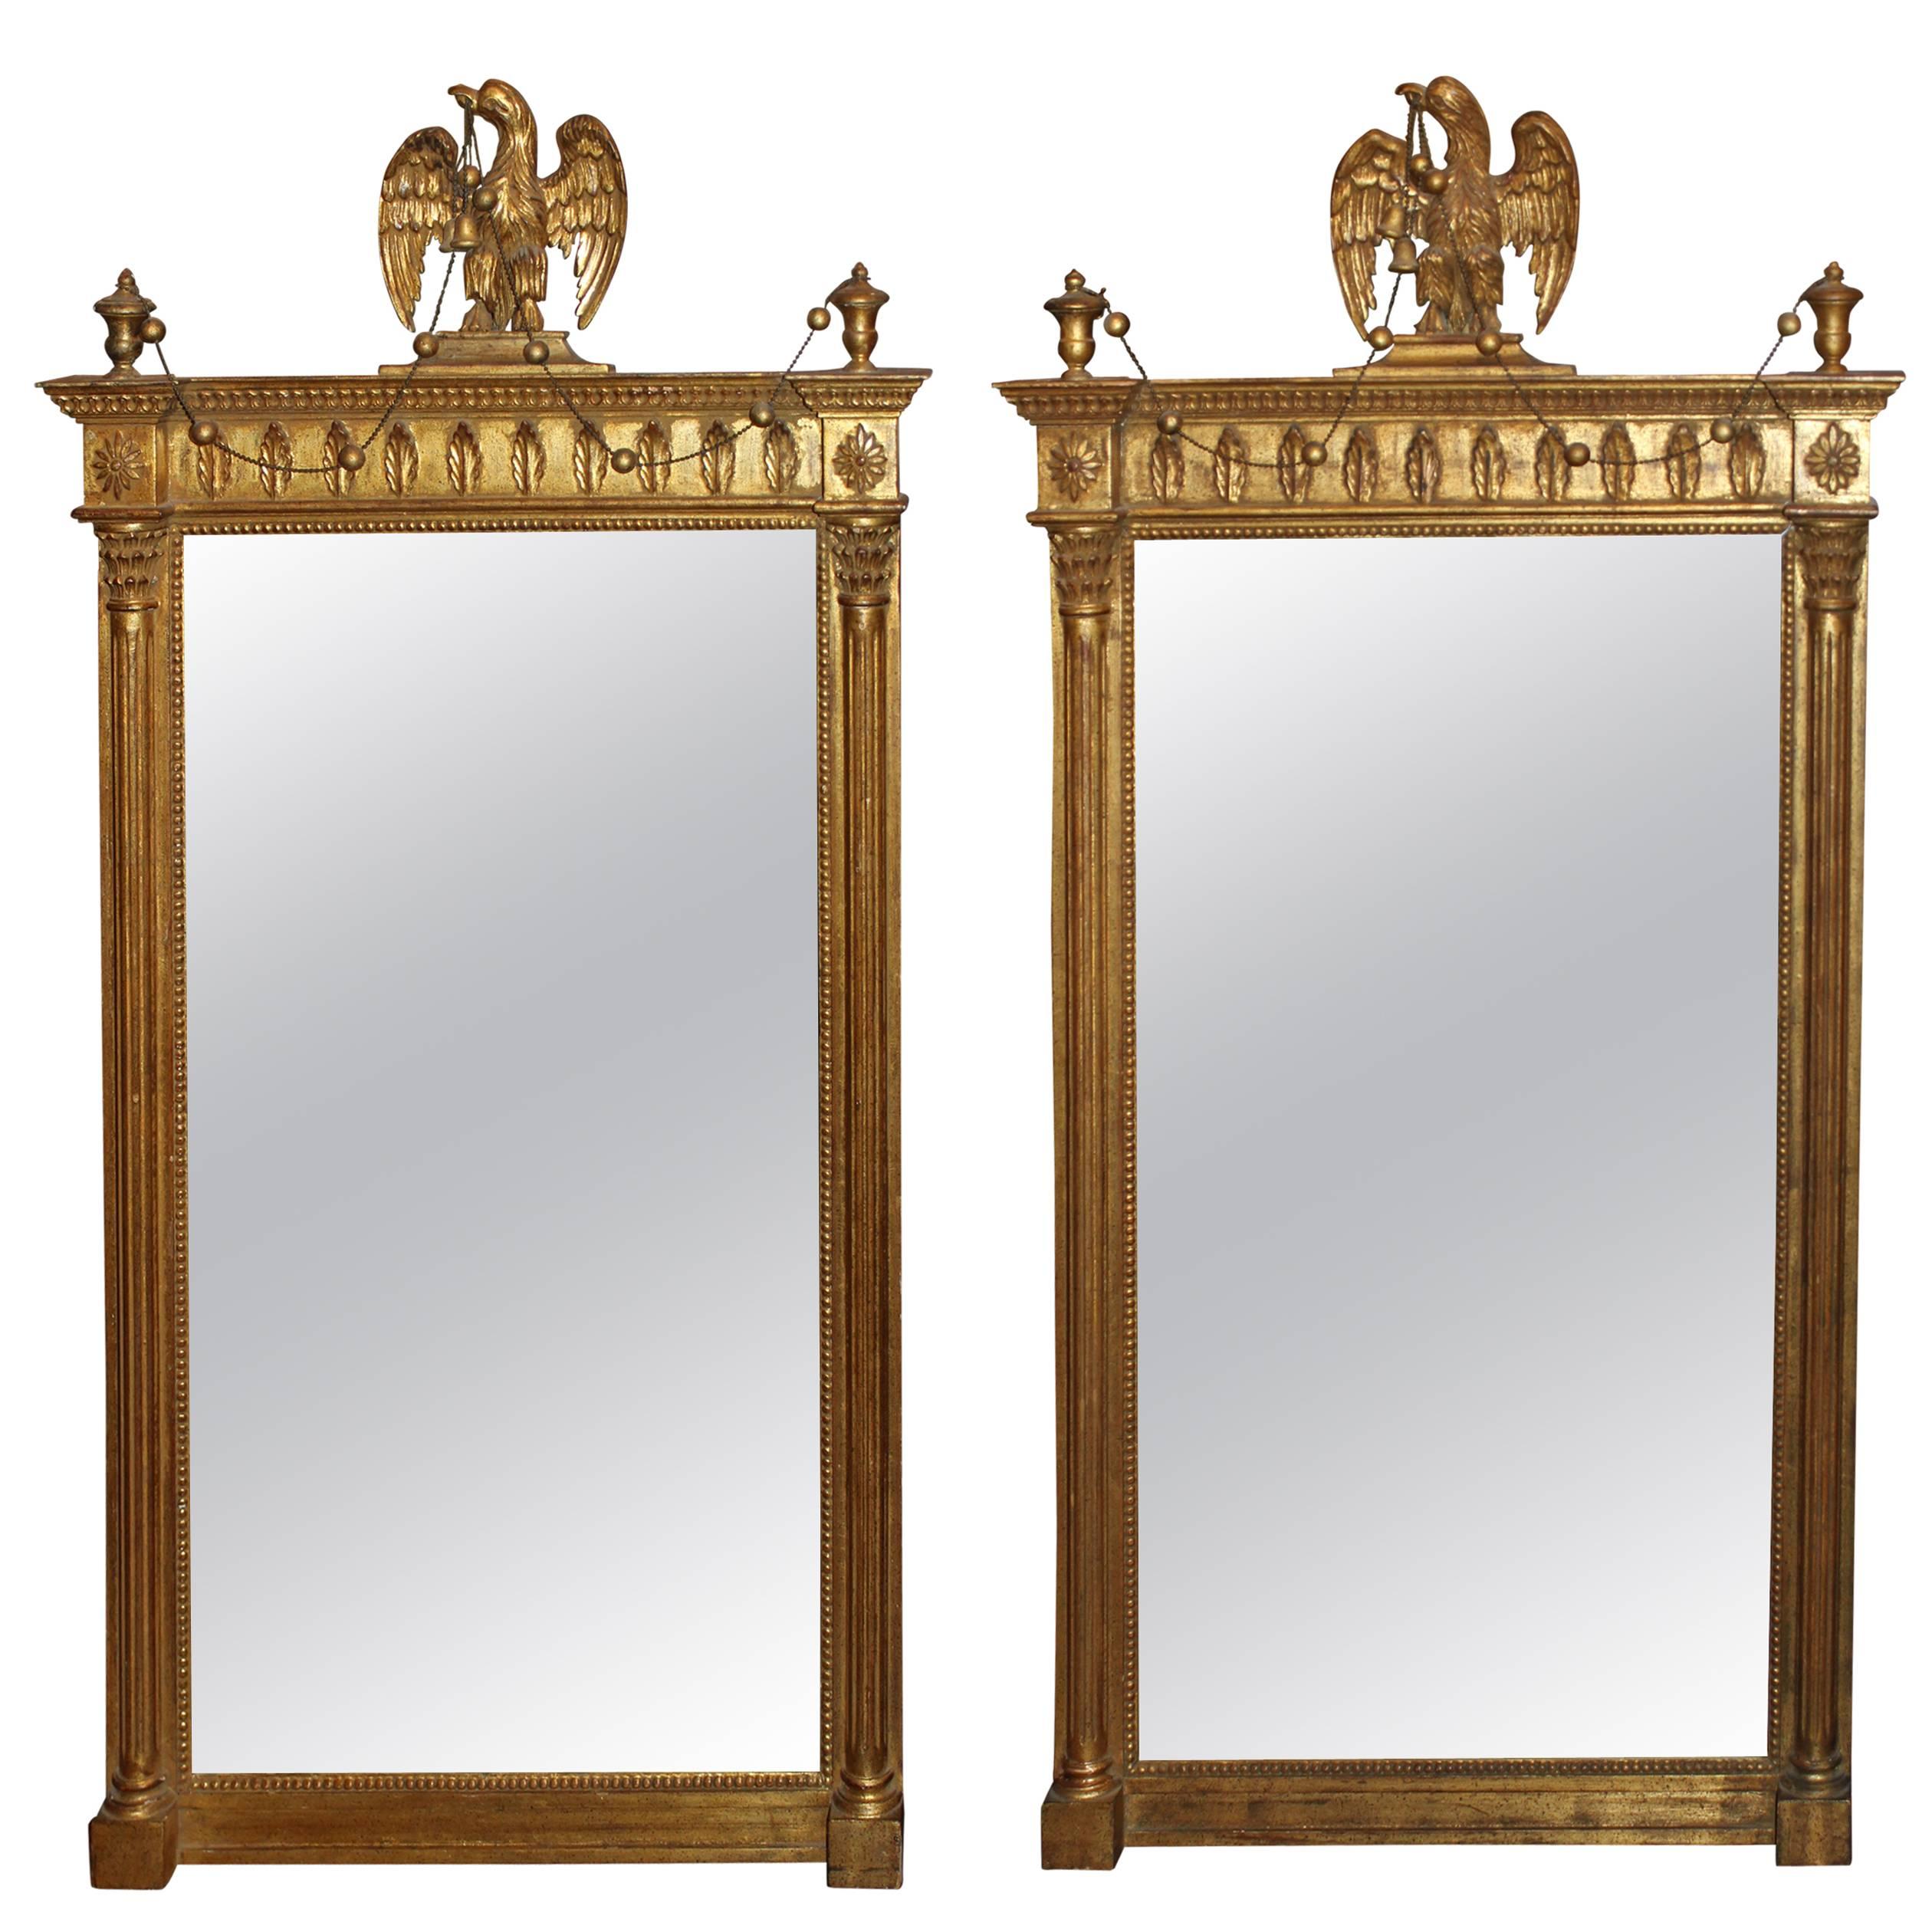 Pair of Classical Style Giltwood Mirrors with Carved Eagles